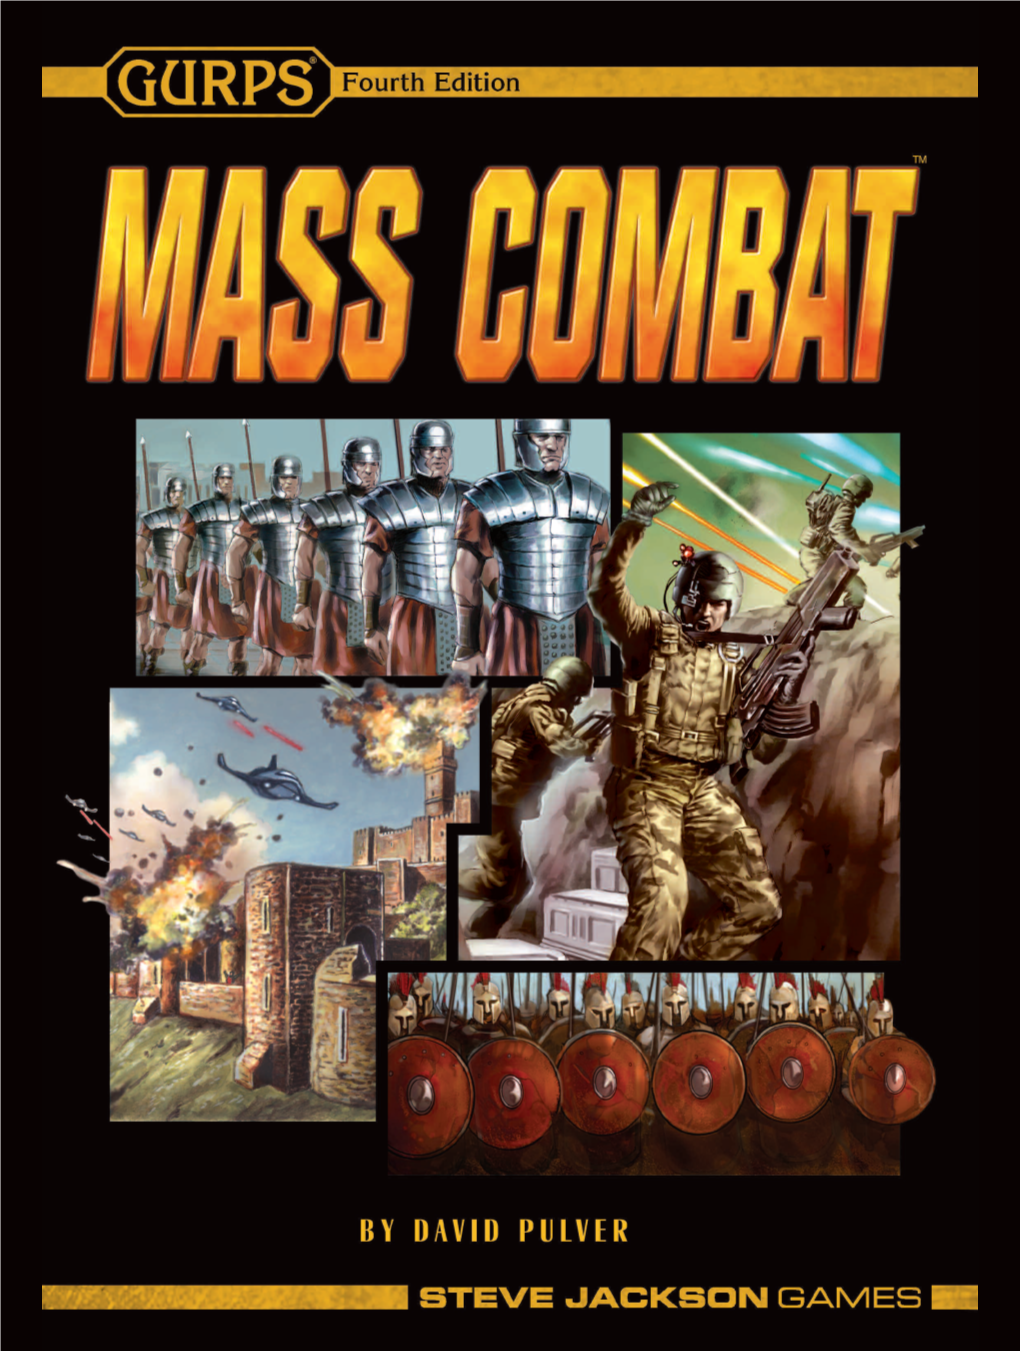 GURPS Mass Combat ! This Powerful Abstract System Lets You Resolve Land, Sea, and Air Battles at Any Tech Level with Just a Few Die Rolls